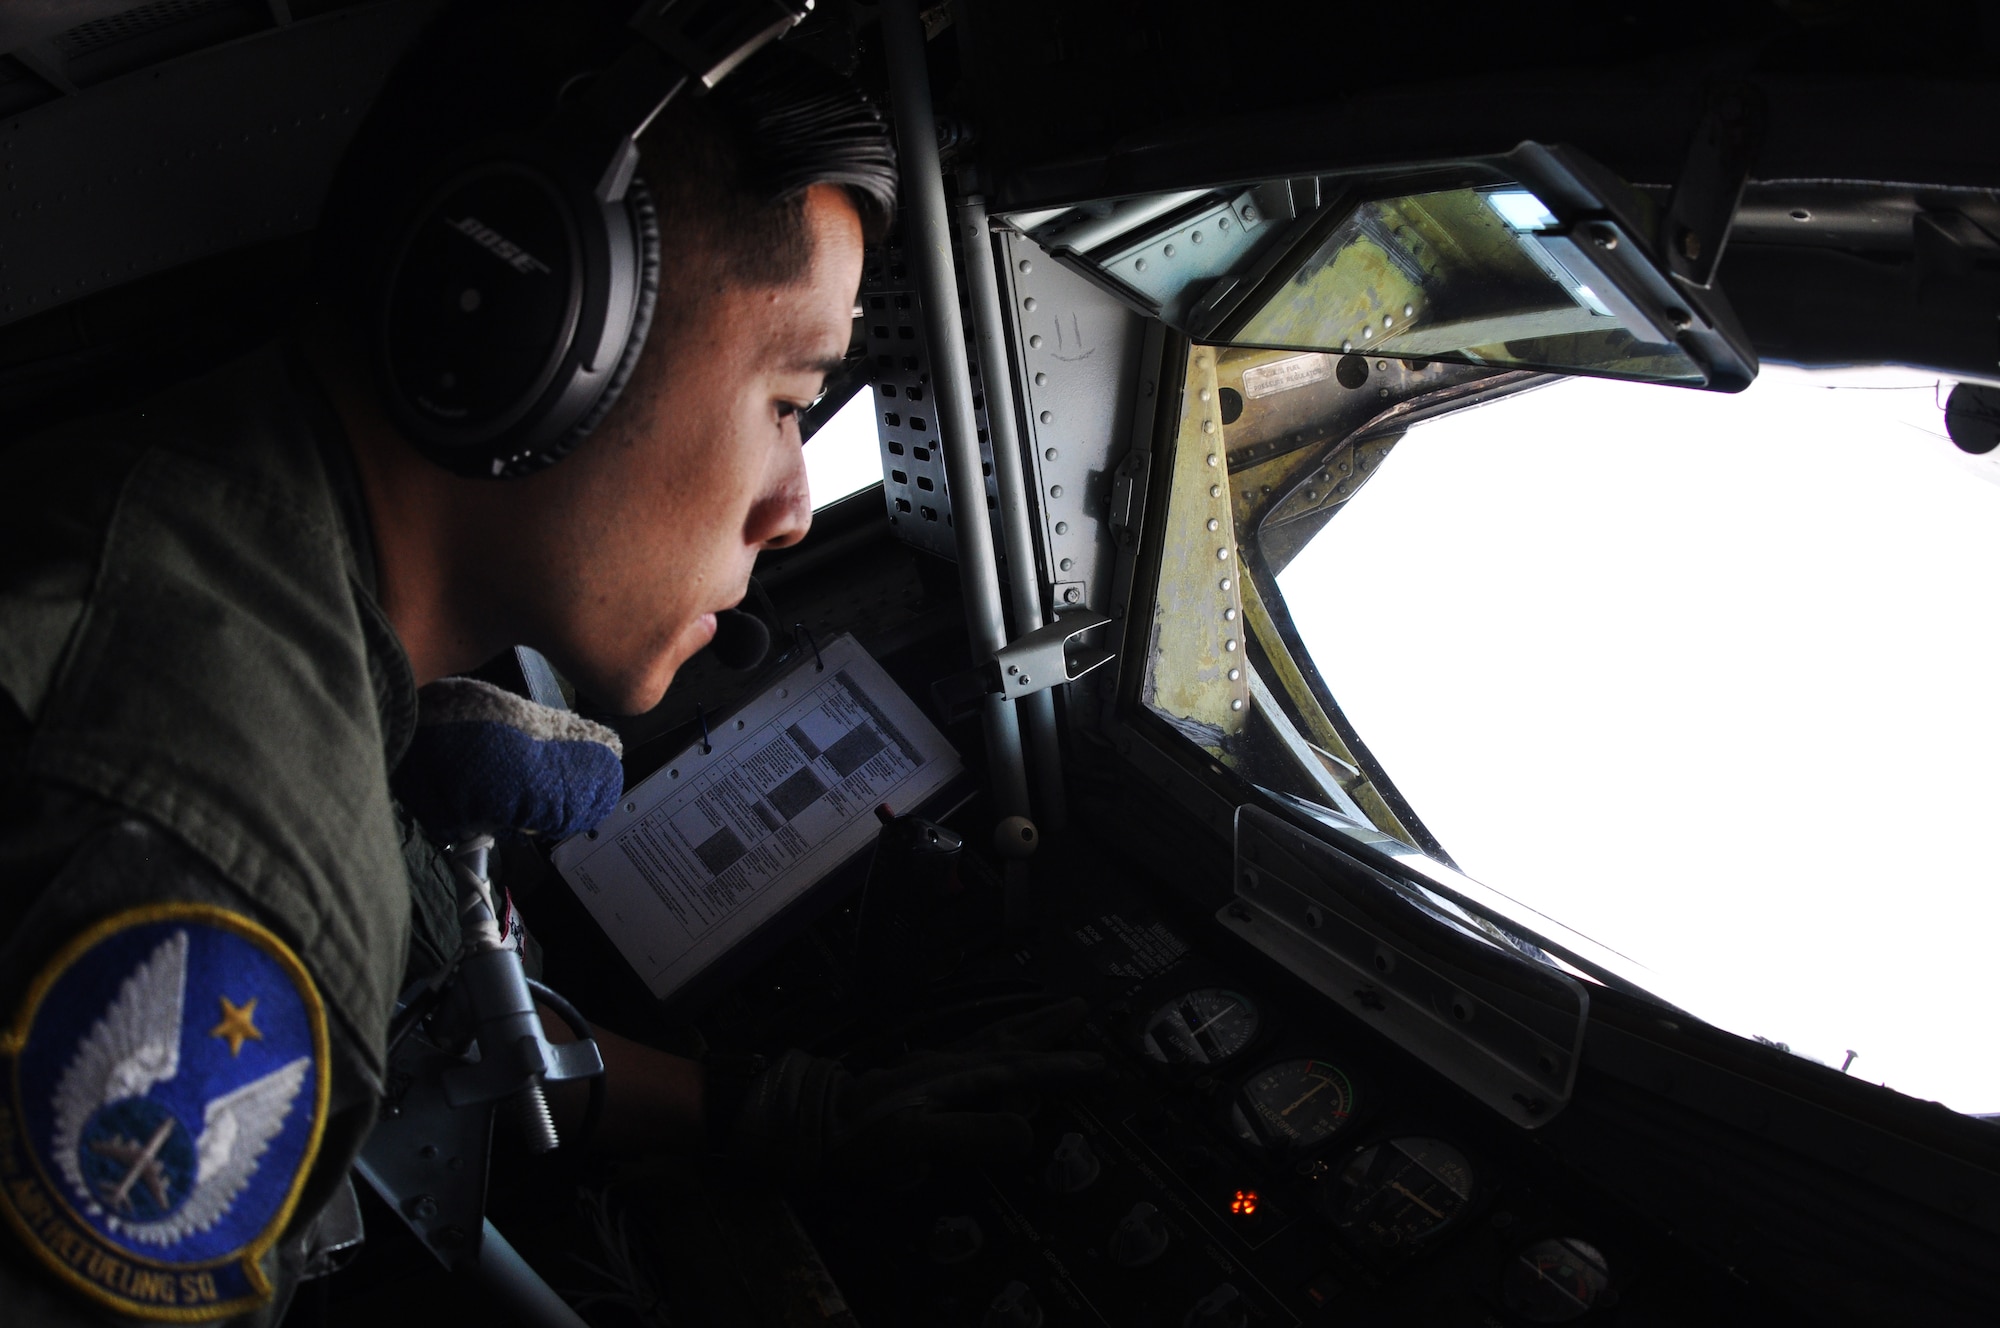 Tech. Sgt. John Bui, 18th Air Refueling Squadron boom operator, prepares to refuel the U.S. Air Force Thunderbirds Air Demonstration Squadron, June 4, 2015.  During the flight, Bui performed fourteen air refueling contacts for the squadron, which was on their way to the Heart of Texas Airshow in Waco, Texas, June 6-7.  (U.S. Air Force photo by Tech. Sgt. Abigail Klein)